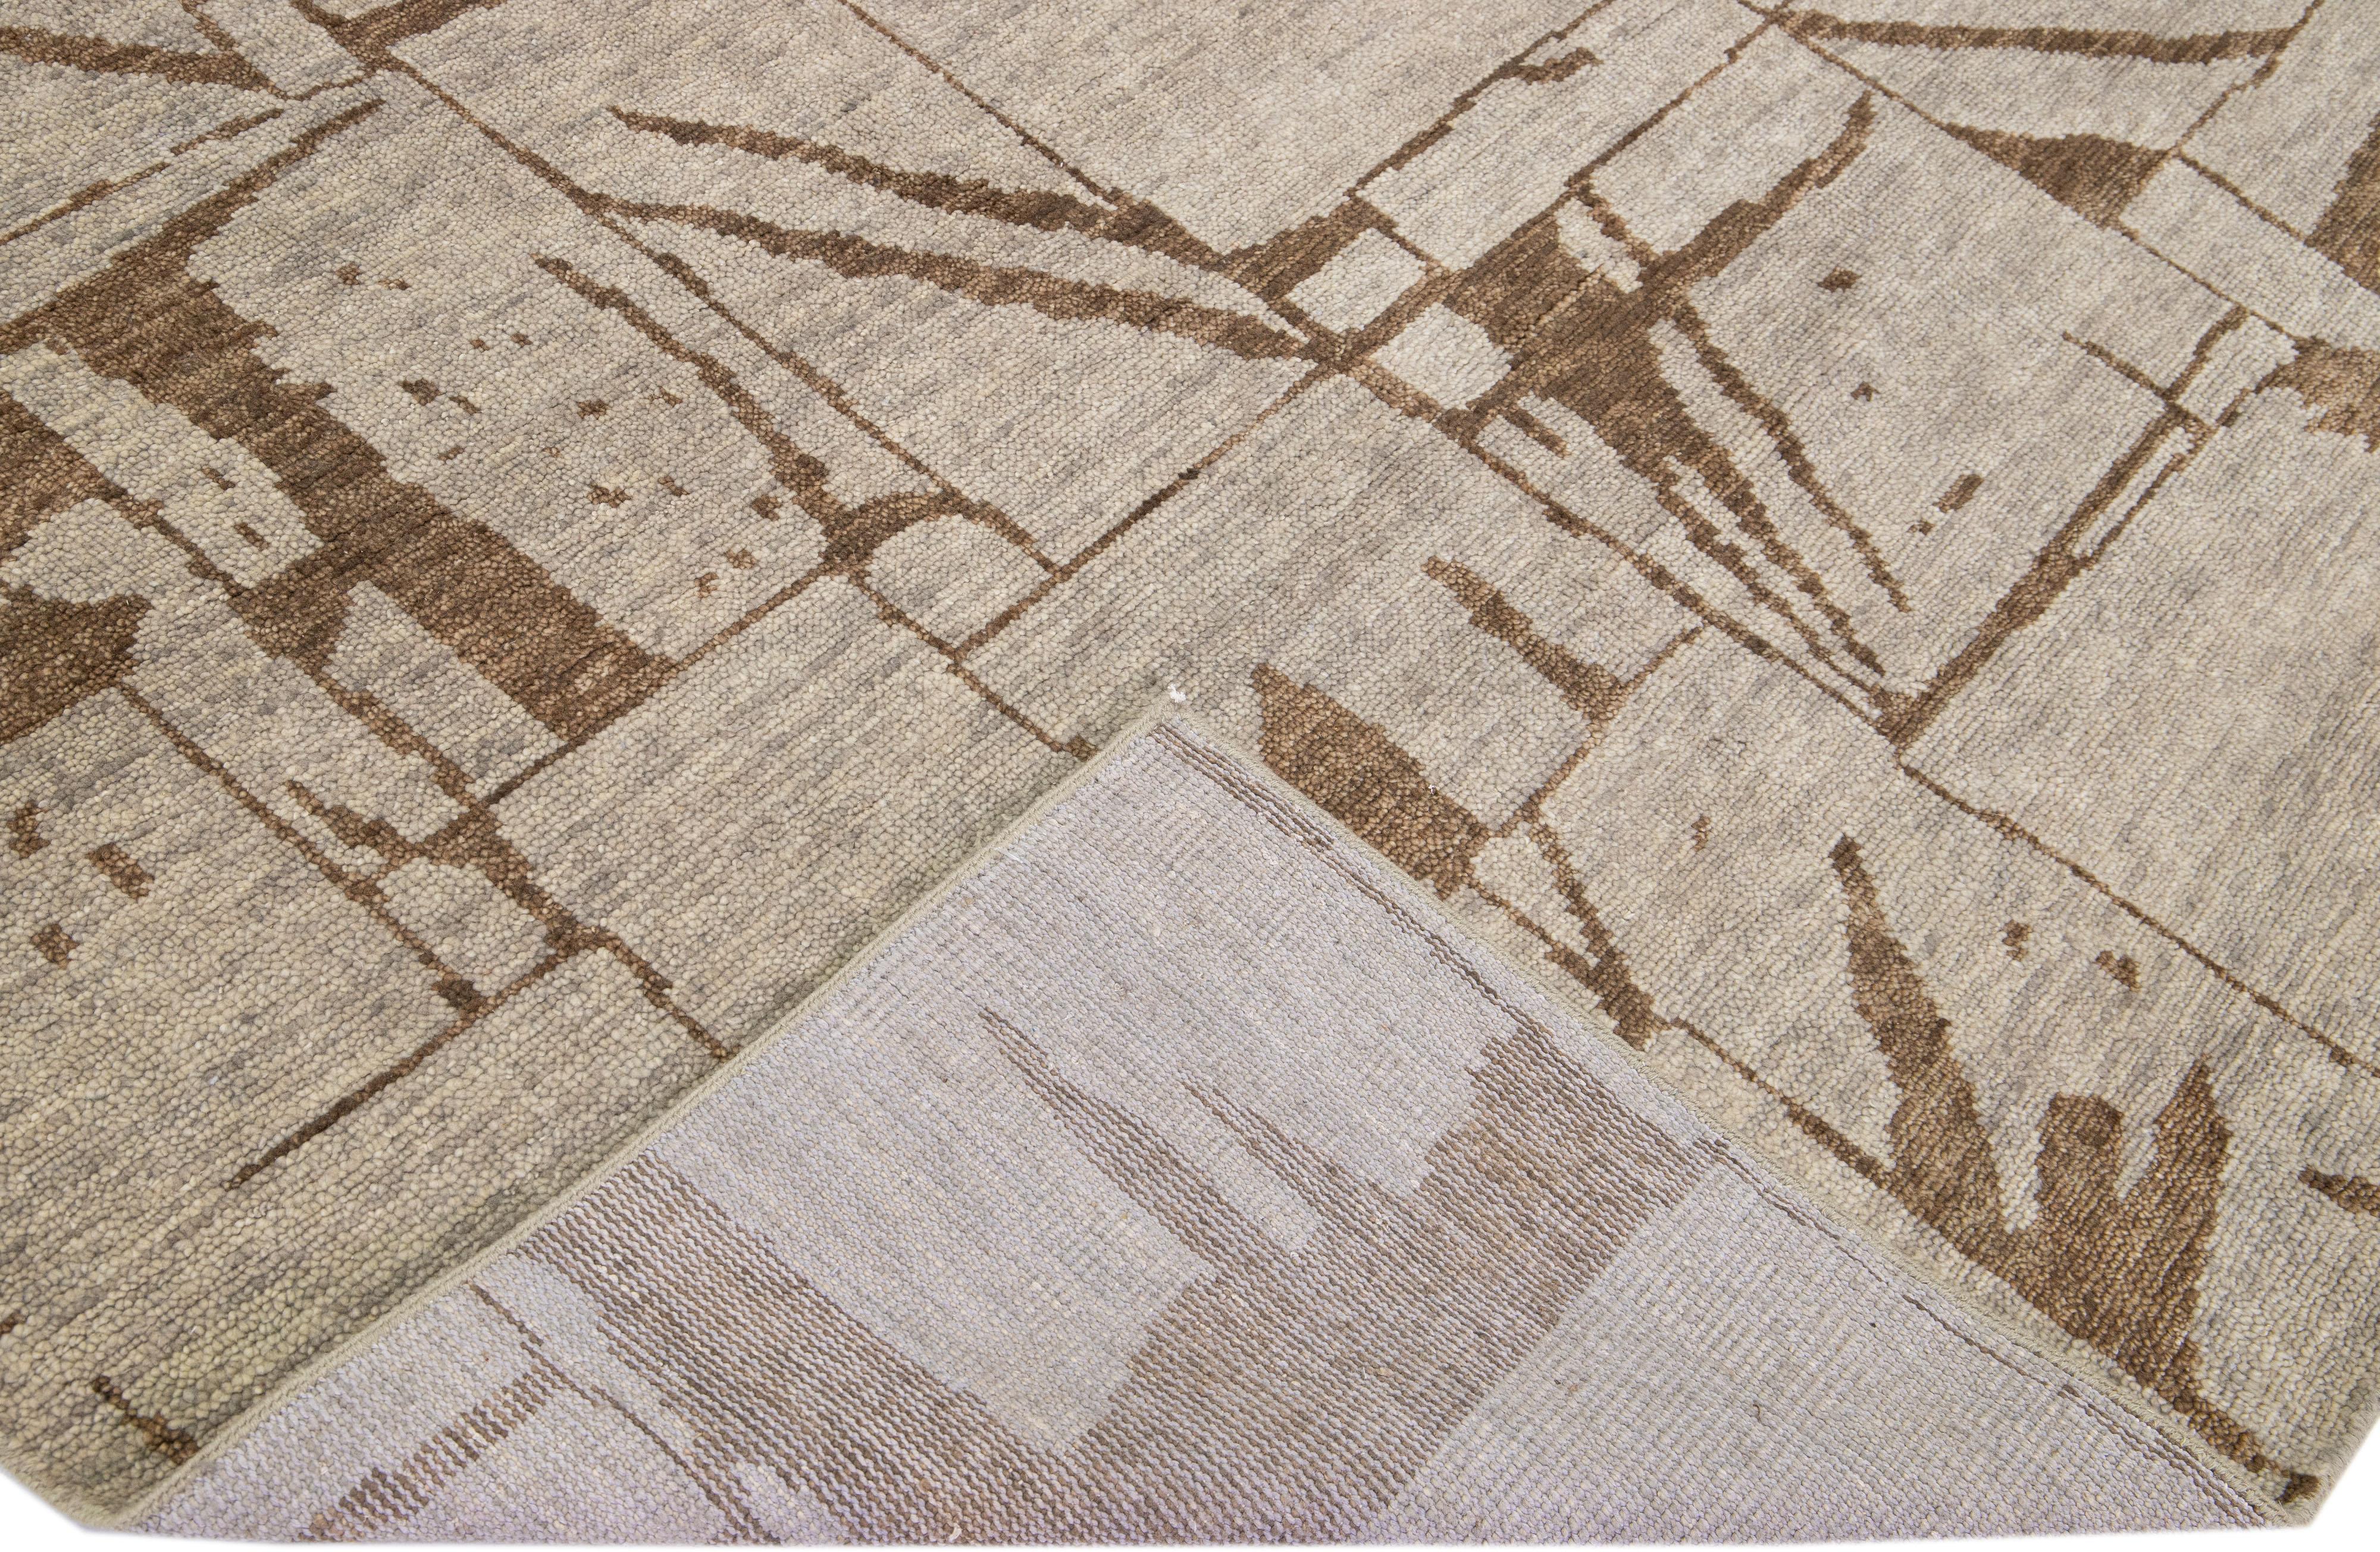 Beautiful Contemporary Thom Filicia Home Collection Rugs. This Indian hand-knotted rug is made of wool and has beige-tan field and brown accents all over the design. 
Thom Filicia´s eye for exquisite detailing and beautiful texture shines through